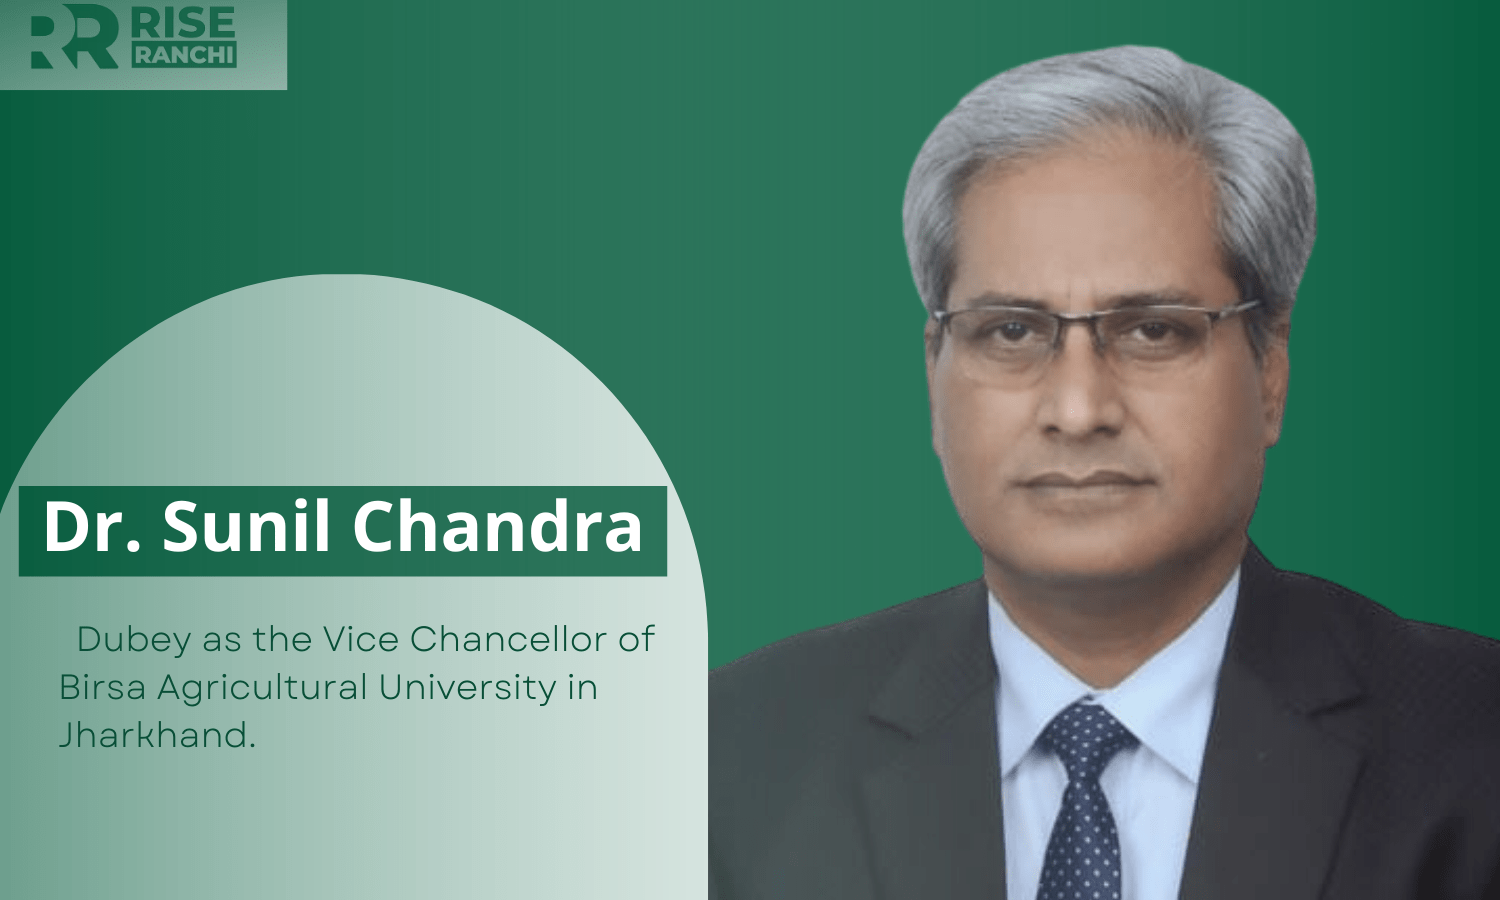 Dr. Sunil Chandra Dubey as Vice-Chancellor of Birsa Agricultural University in Jharkhand